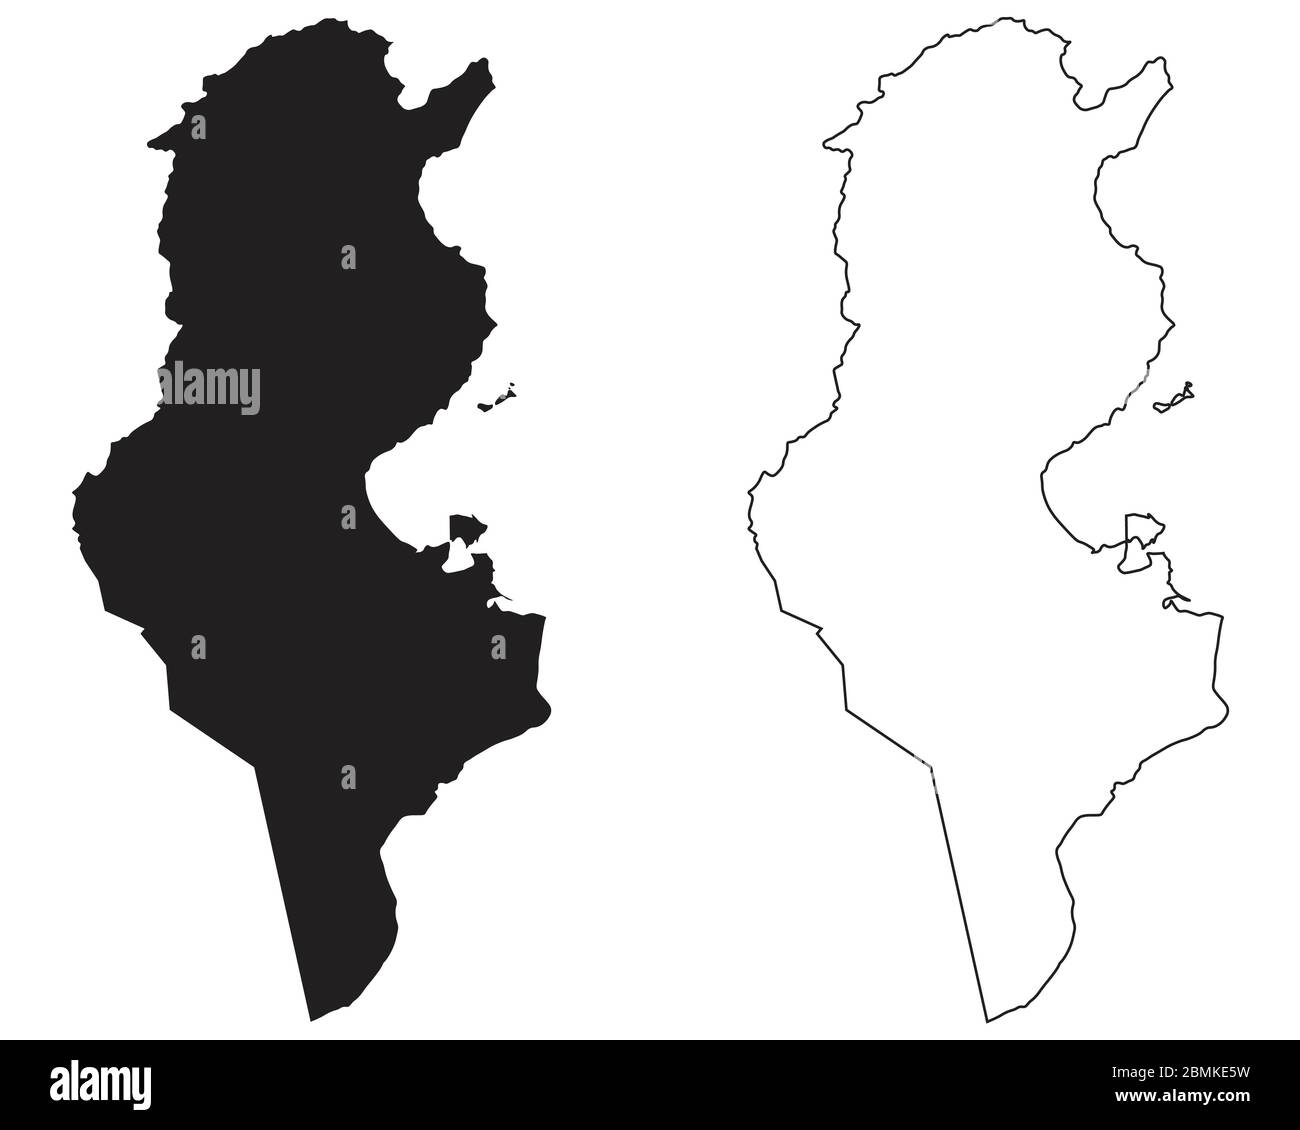 Tunisia Country Map. Black silhouette and outline isolated on white background. EPS Vector Stock Vector